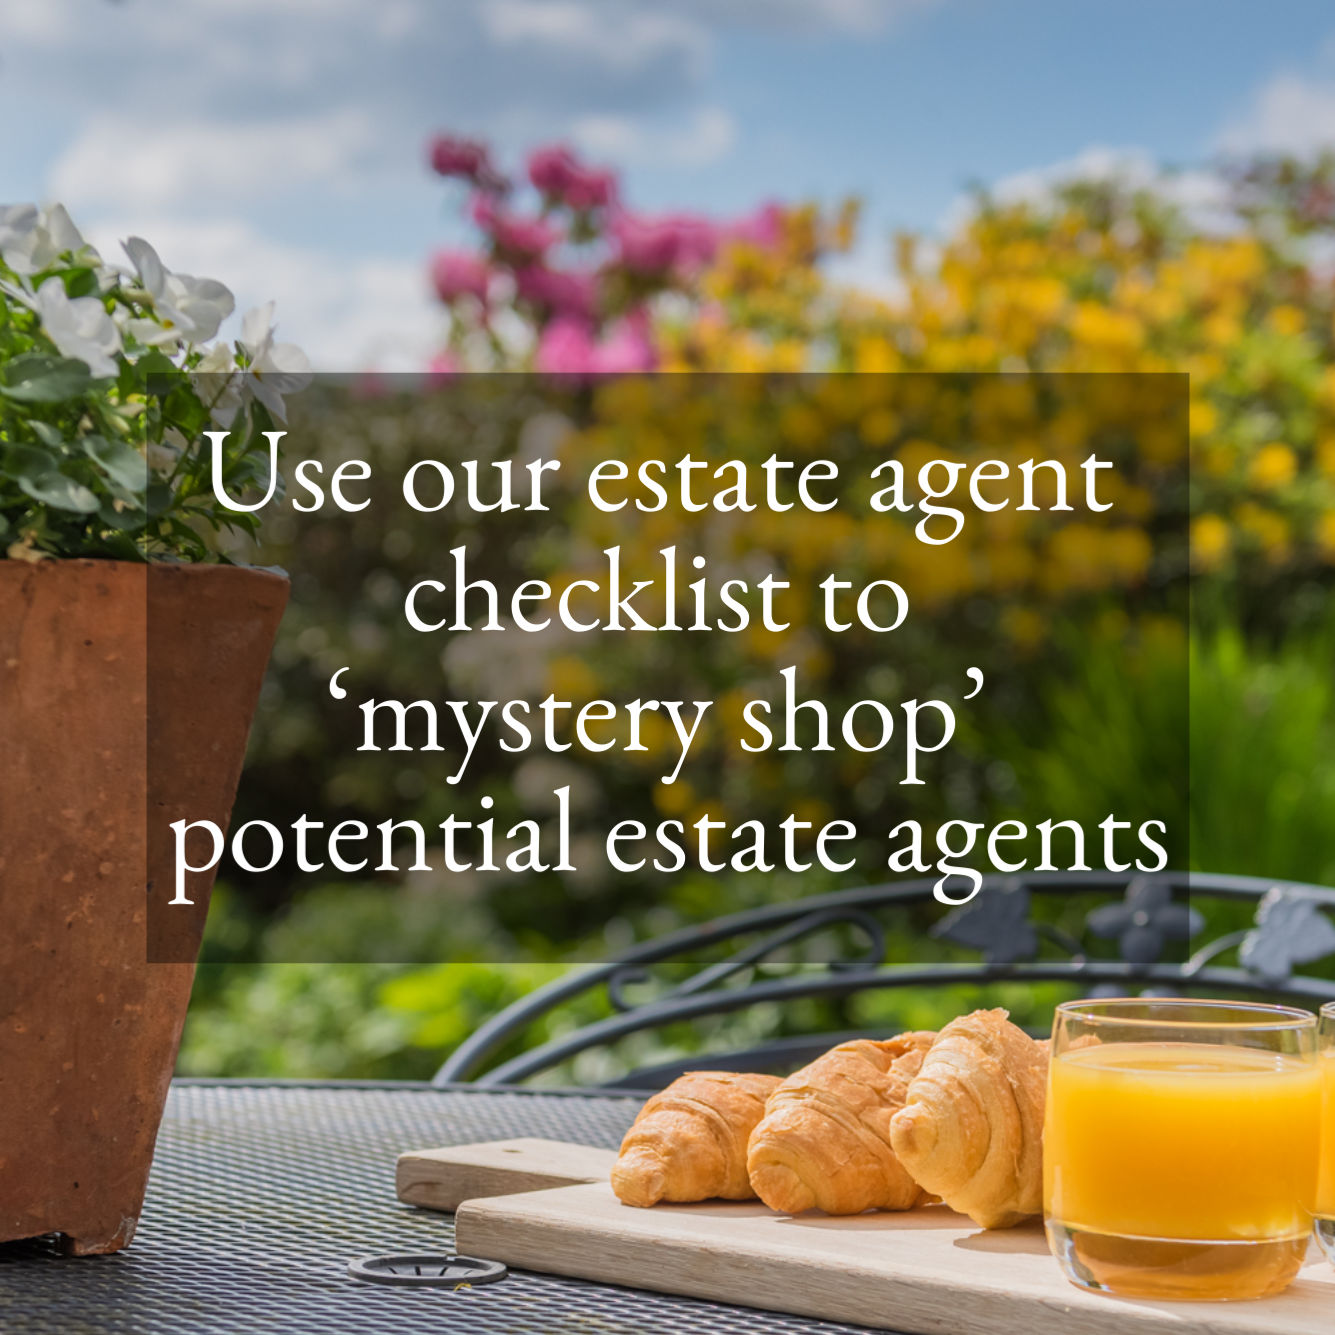 tg4-use-our-estate-agent-checklist